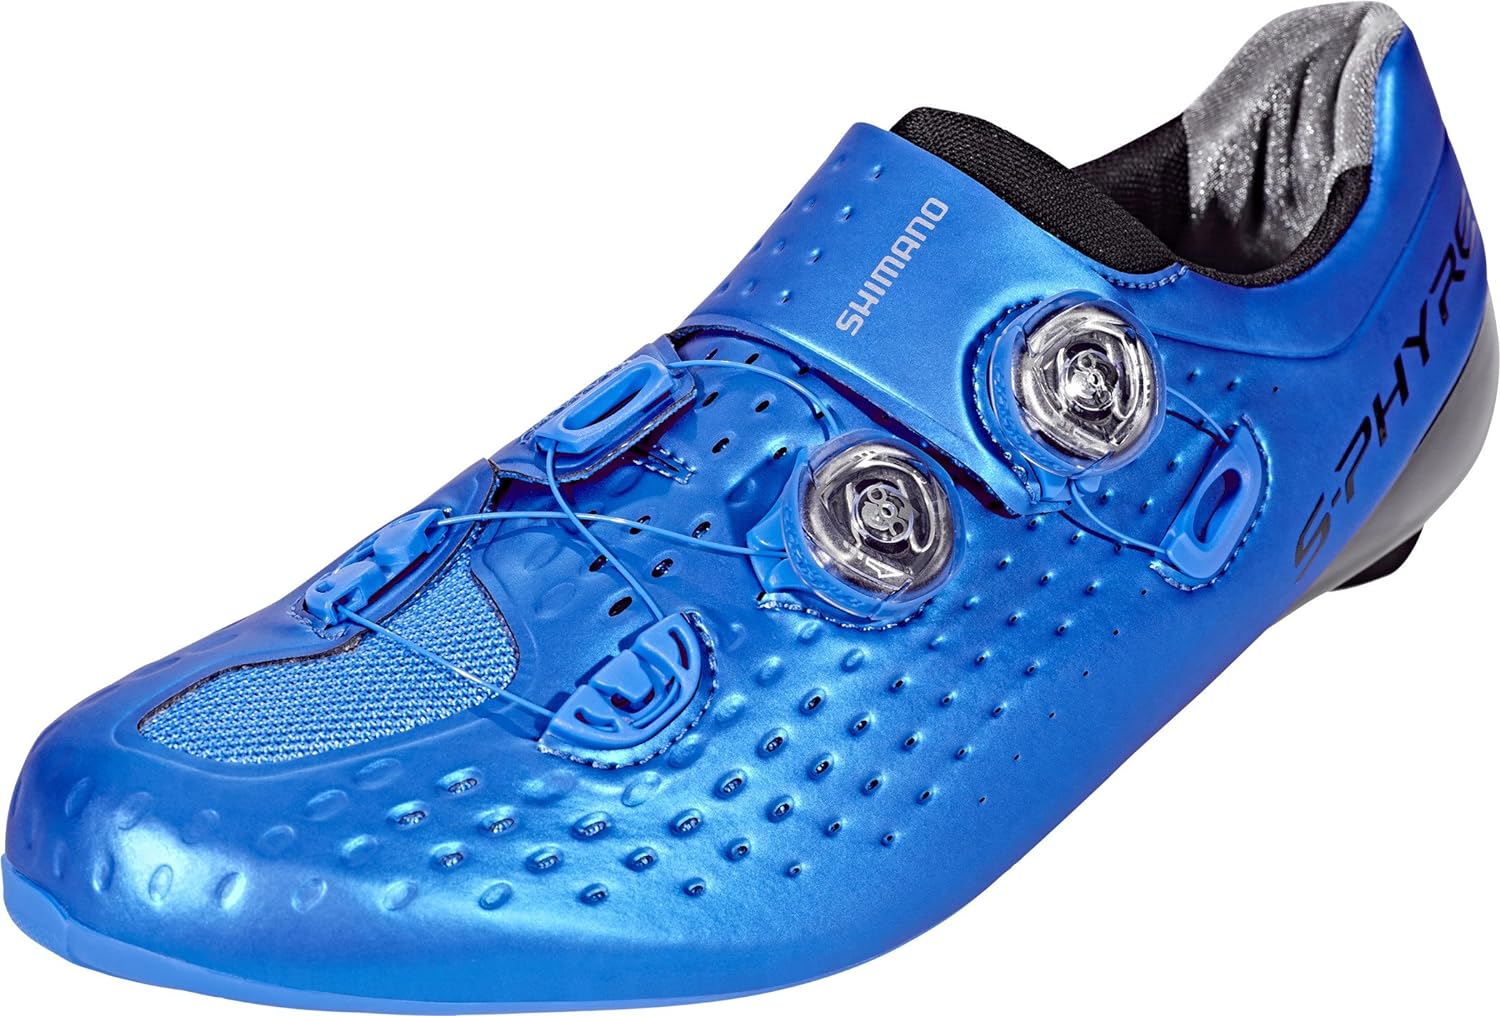 Shimano S-Phyre RC9B Road Shoe Blue Size 45